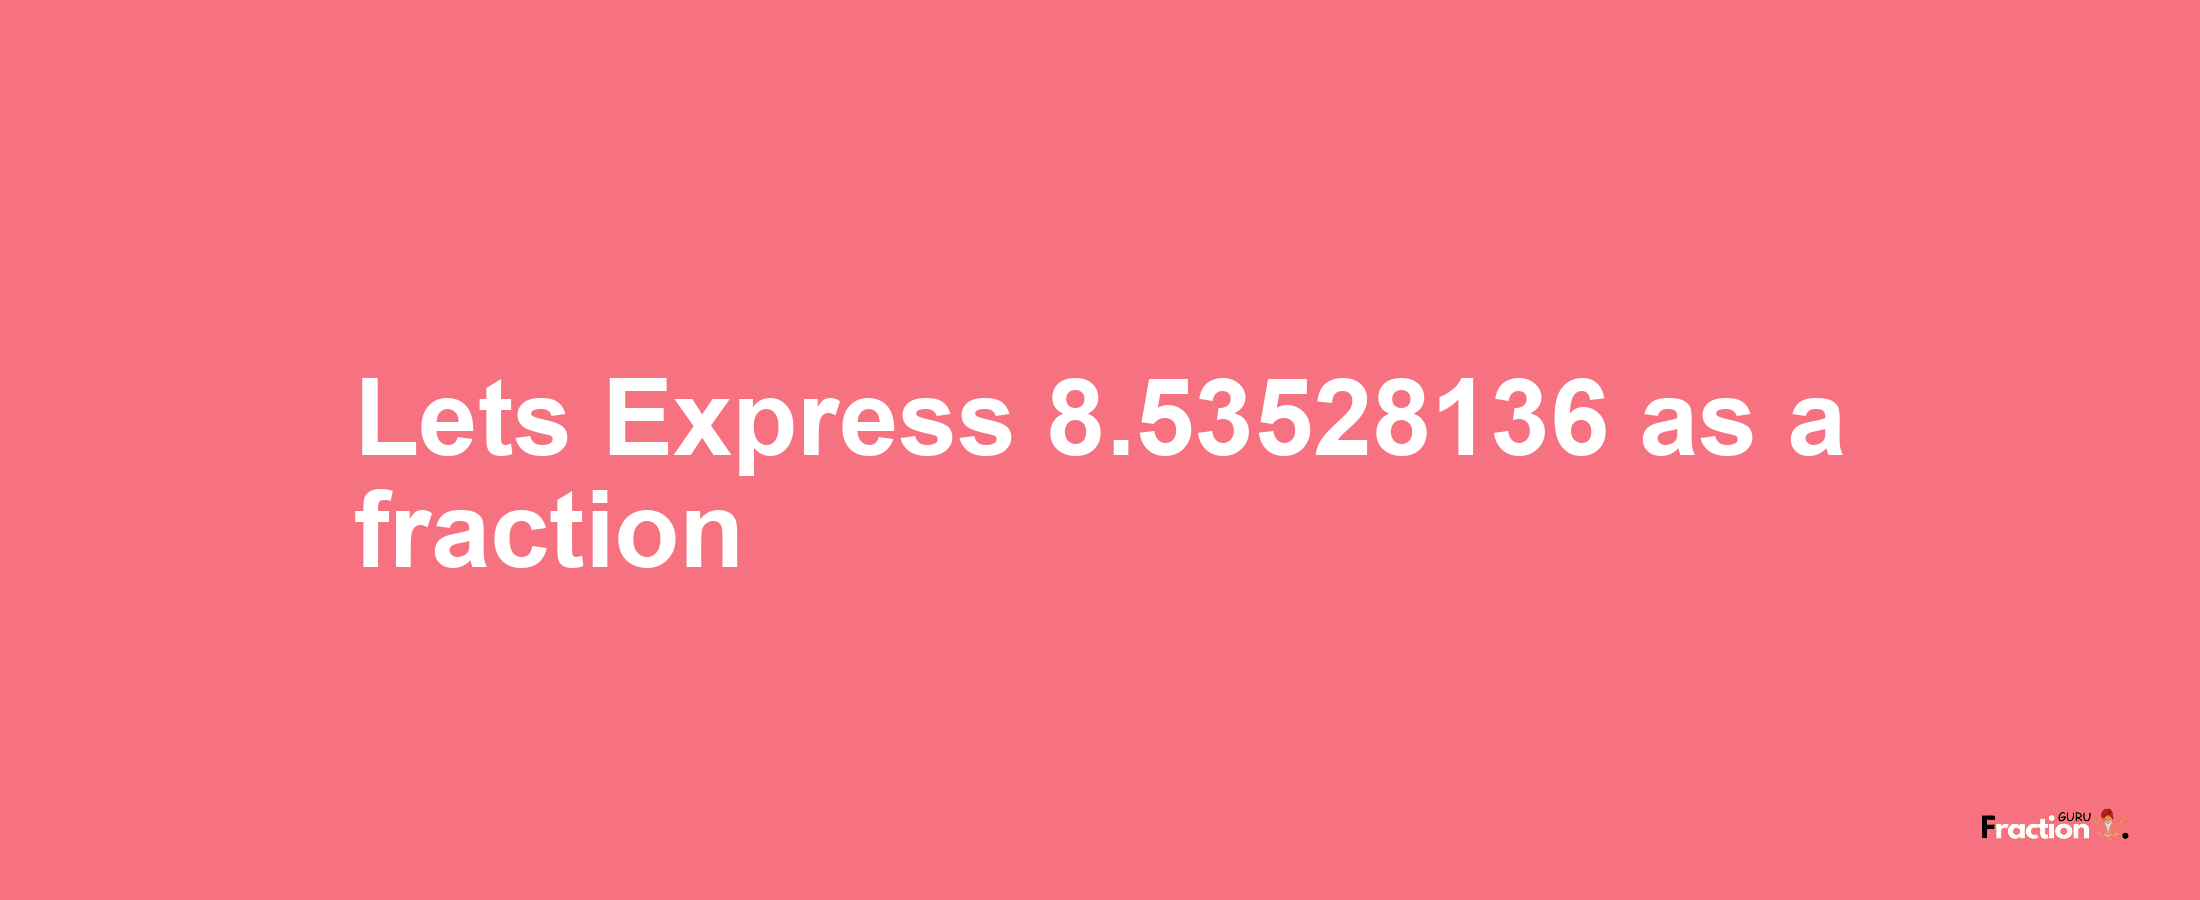 Lets Express 8.53528136 as afraction